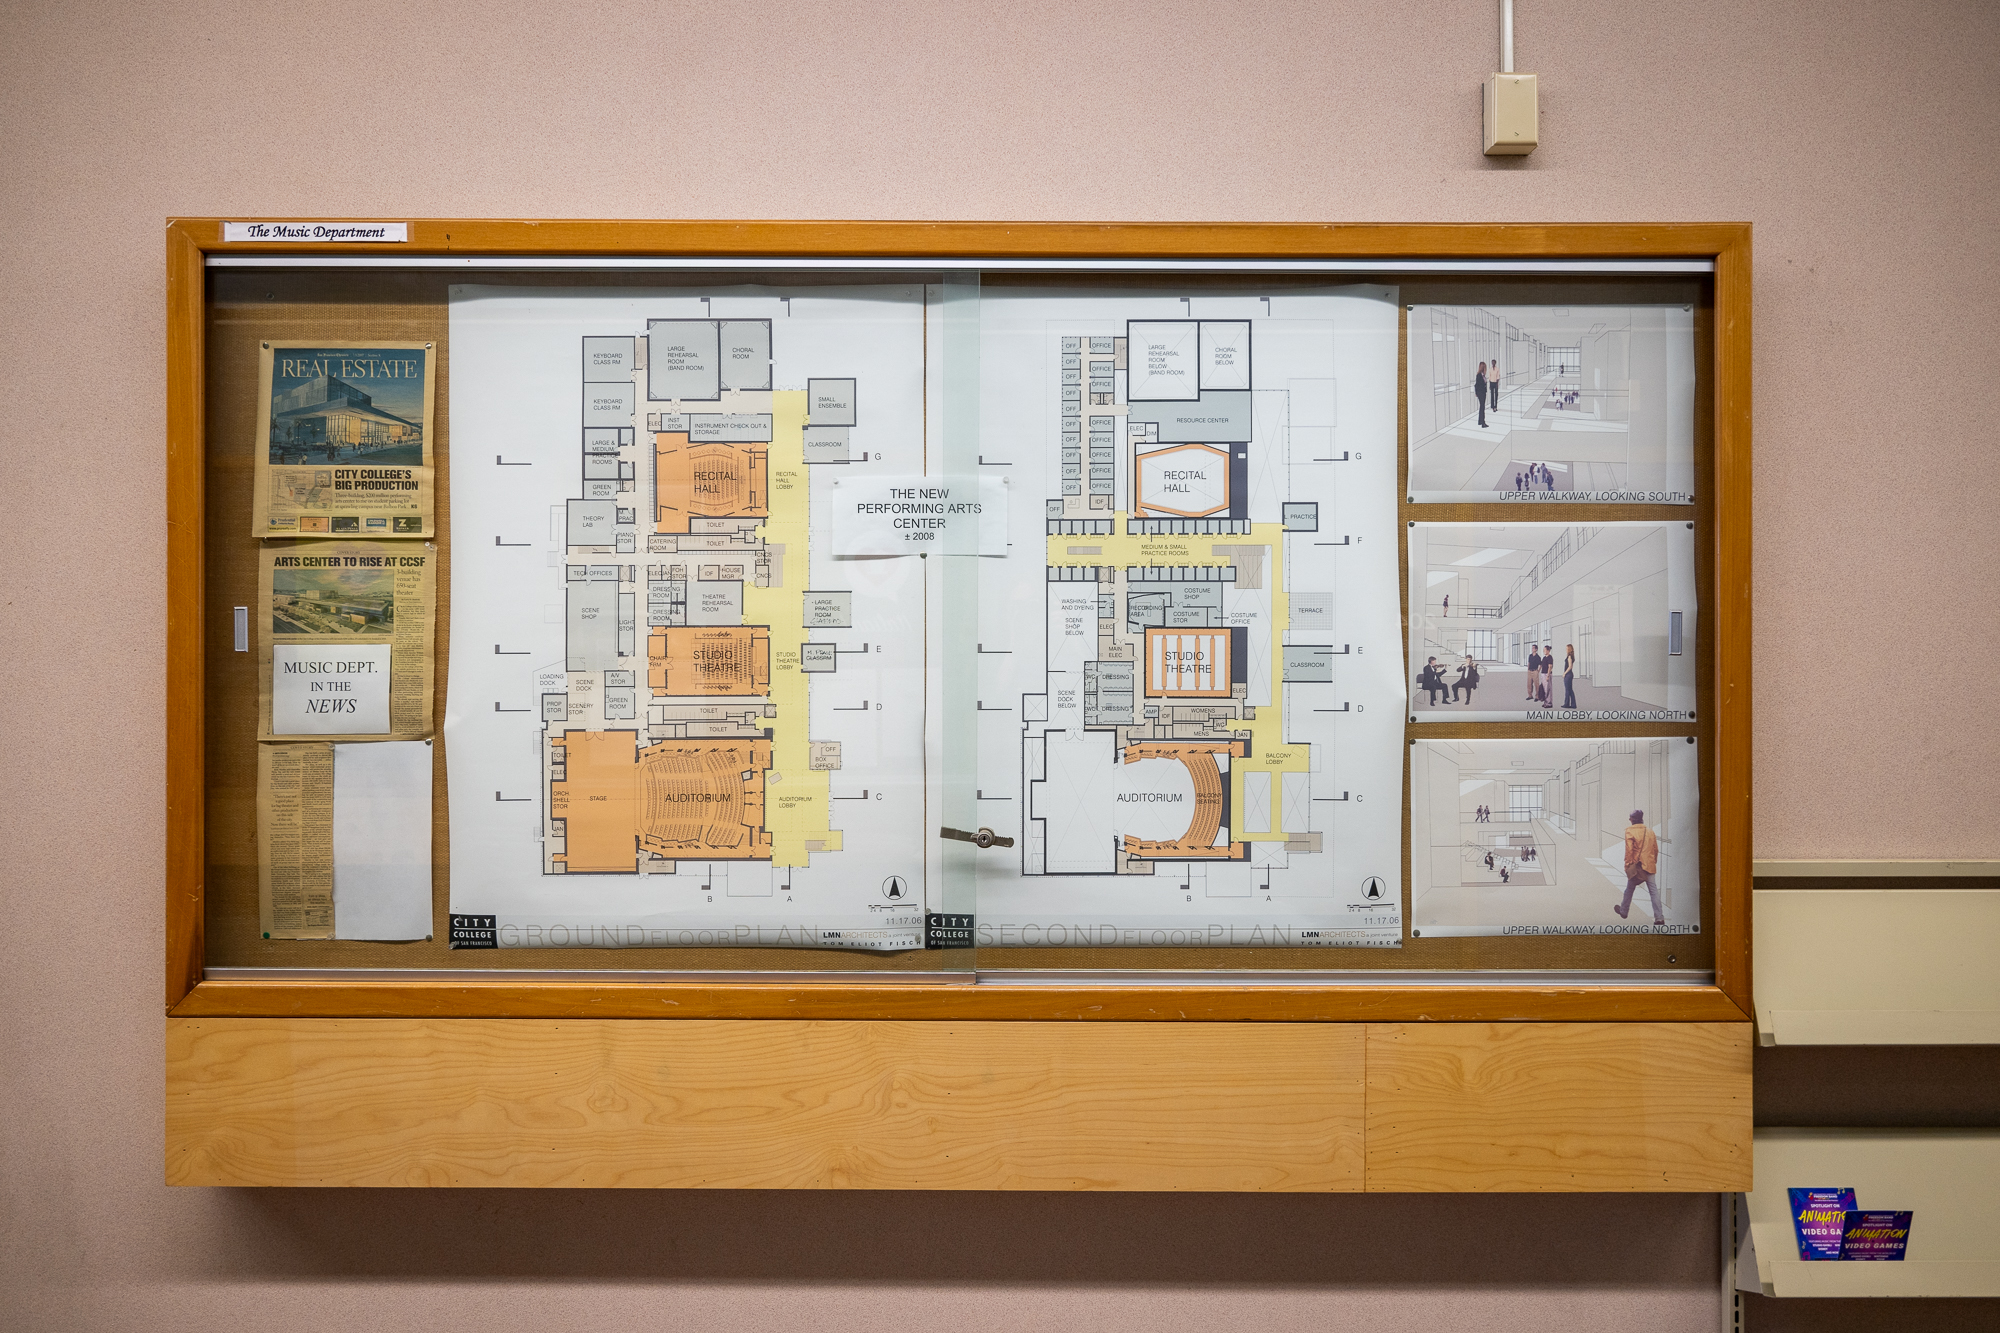 What appear to be detailed architectural renderings, including mock-up illustrations of an interior space, are displayed in a glass case